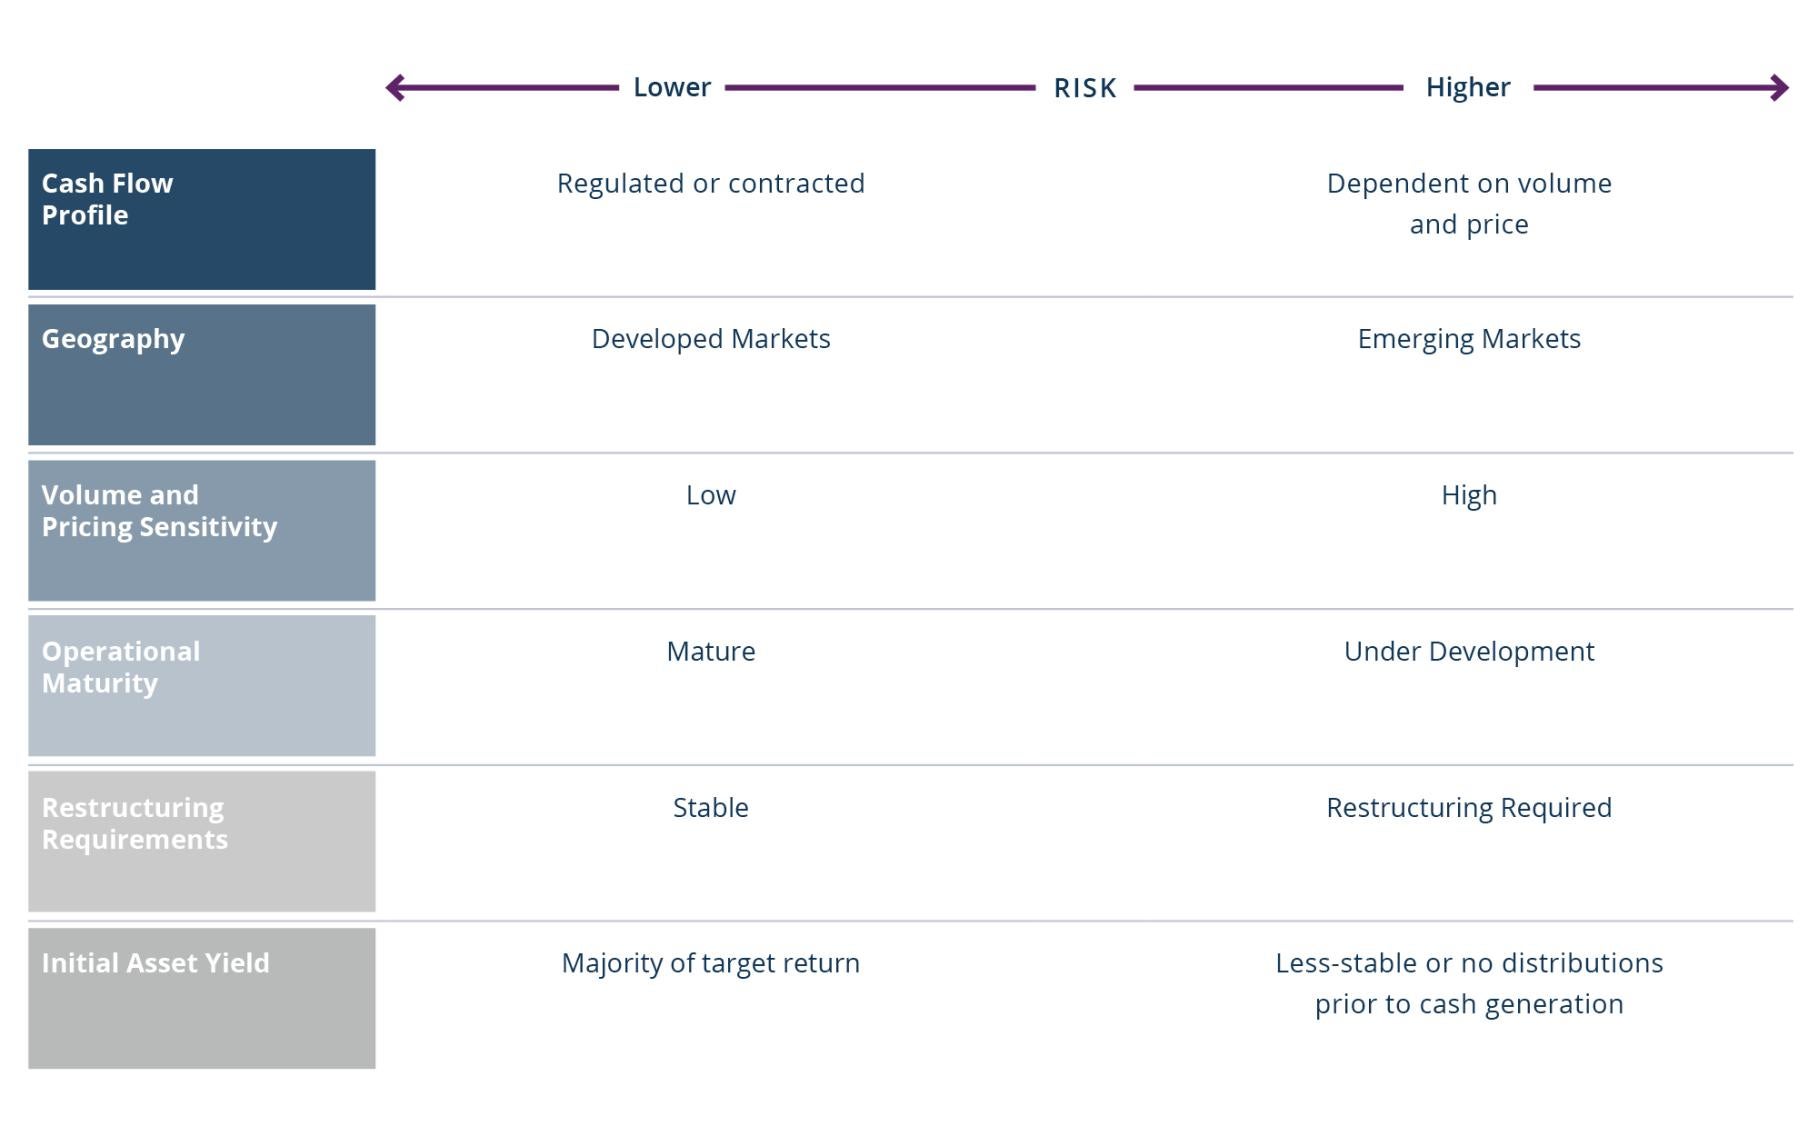 Figure 2: Risk Attributes of an Infrastructure Asset